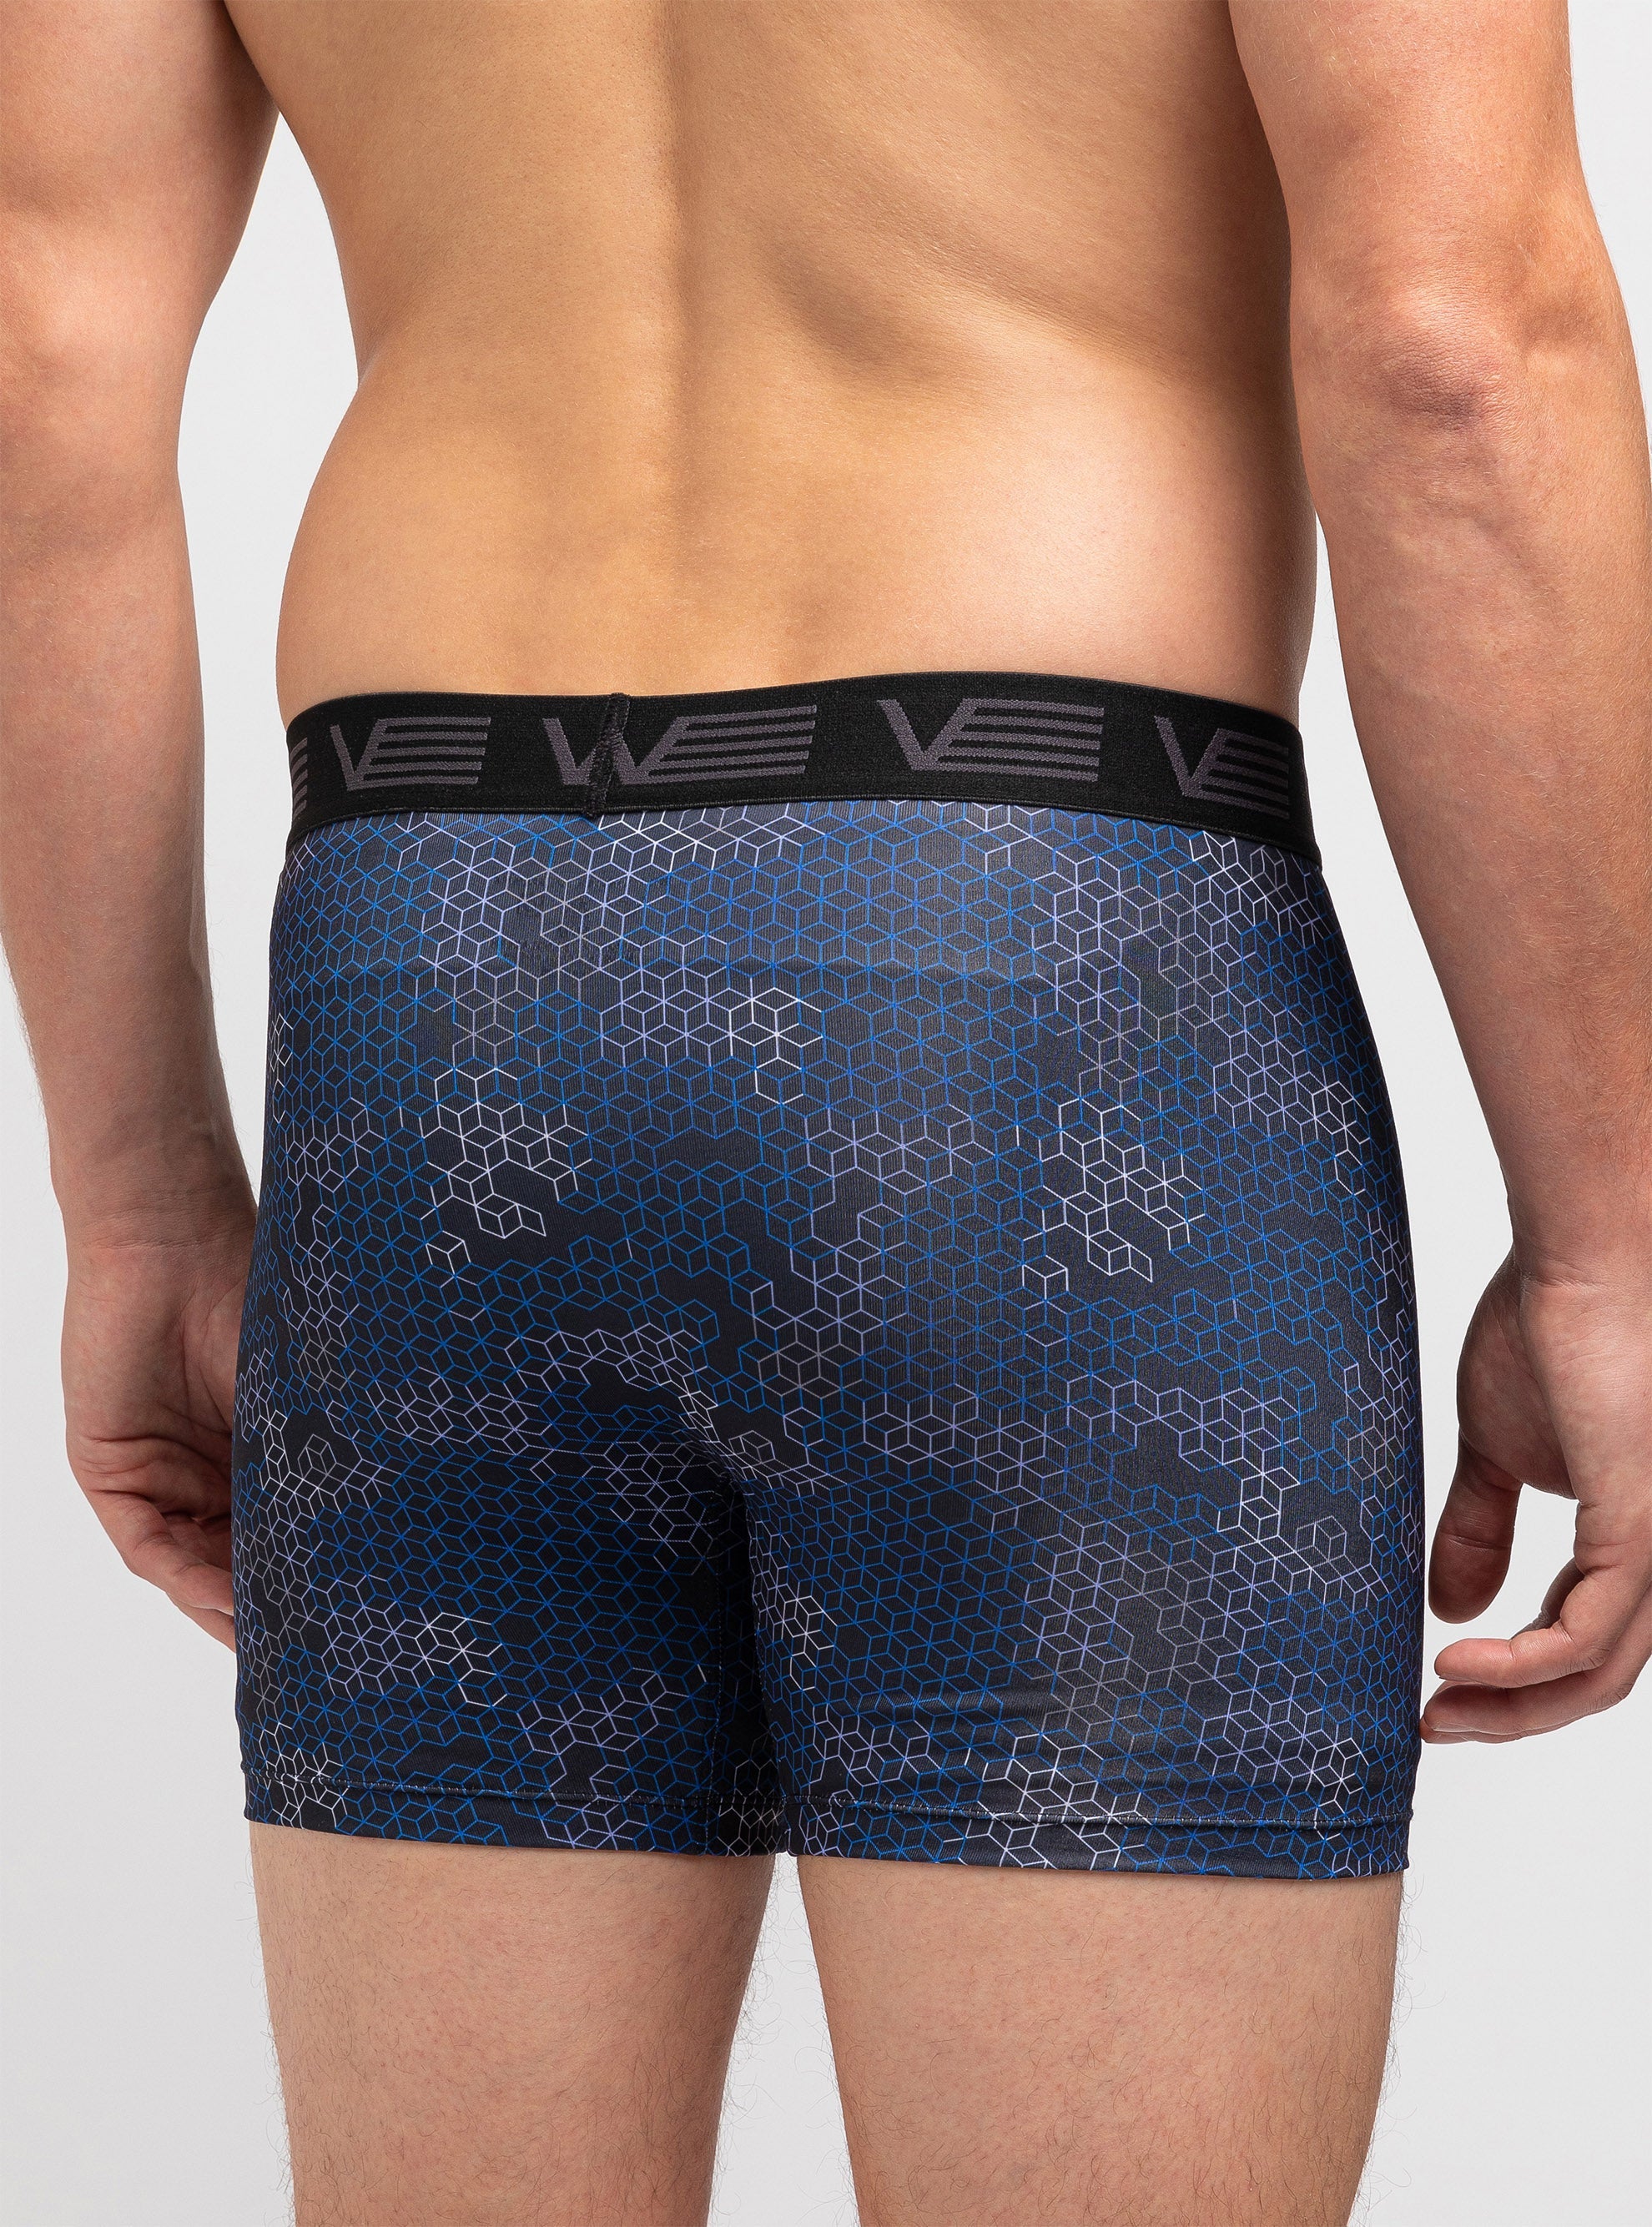 3D cube printed boxers